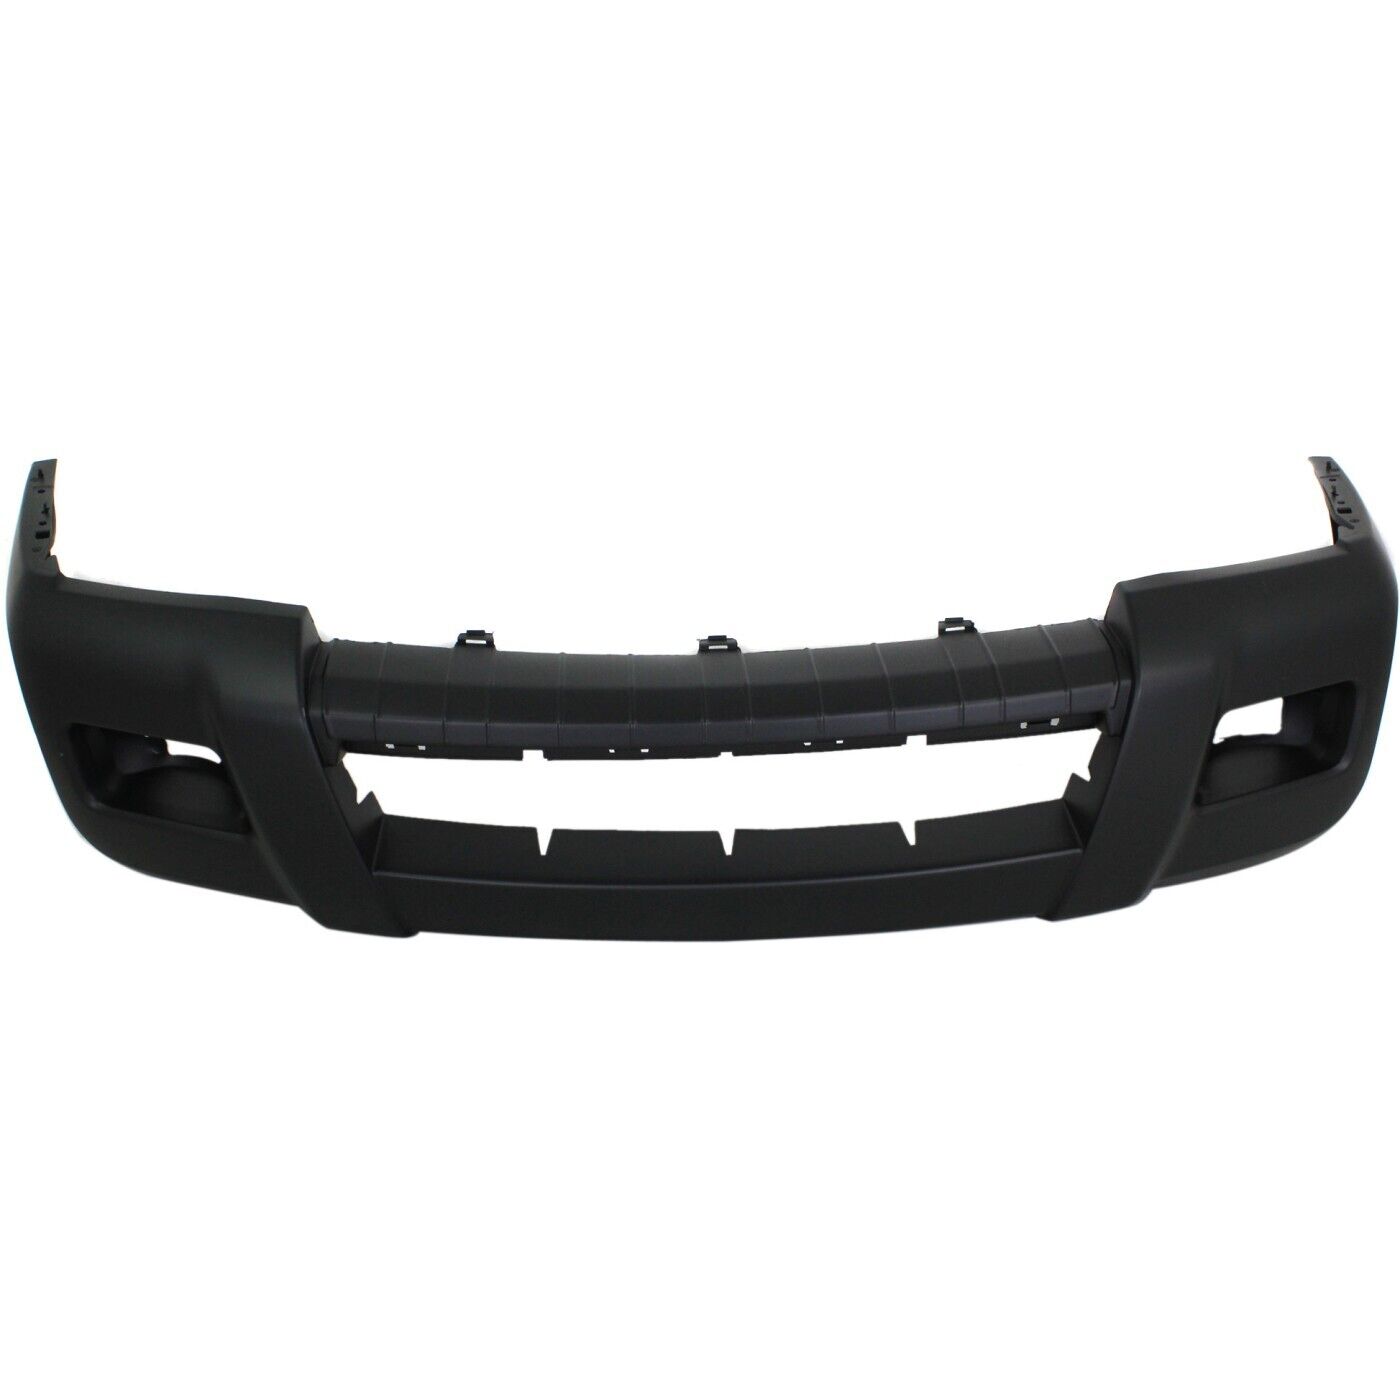 Front Bumper Cover For 06-10 Mercury Mountaineer w/ fog lamp holes Primed CAPA